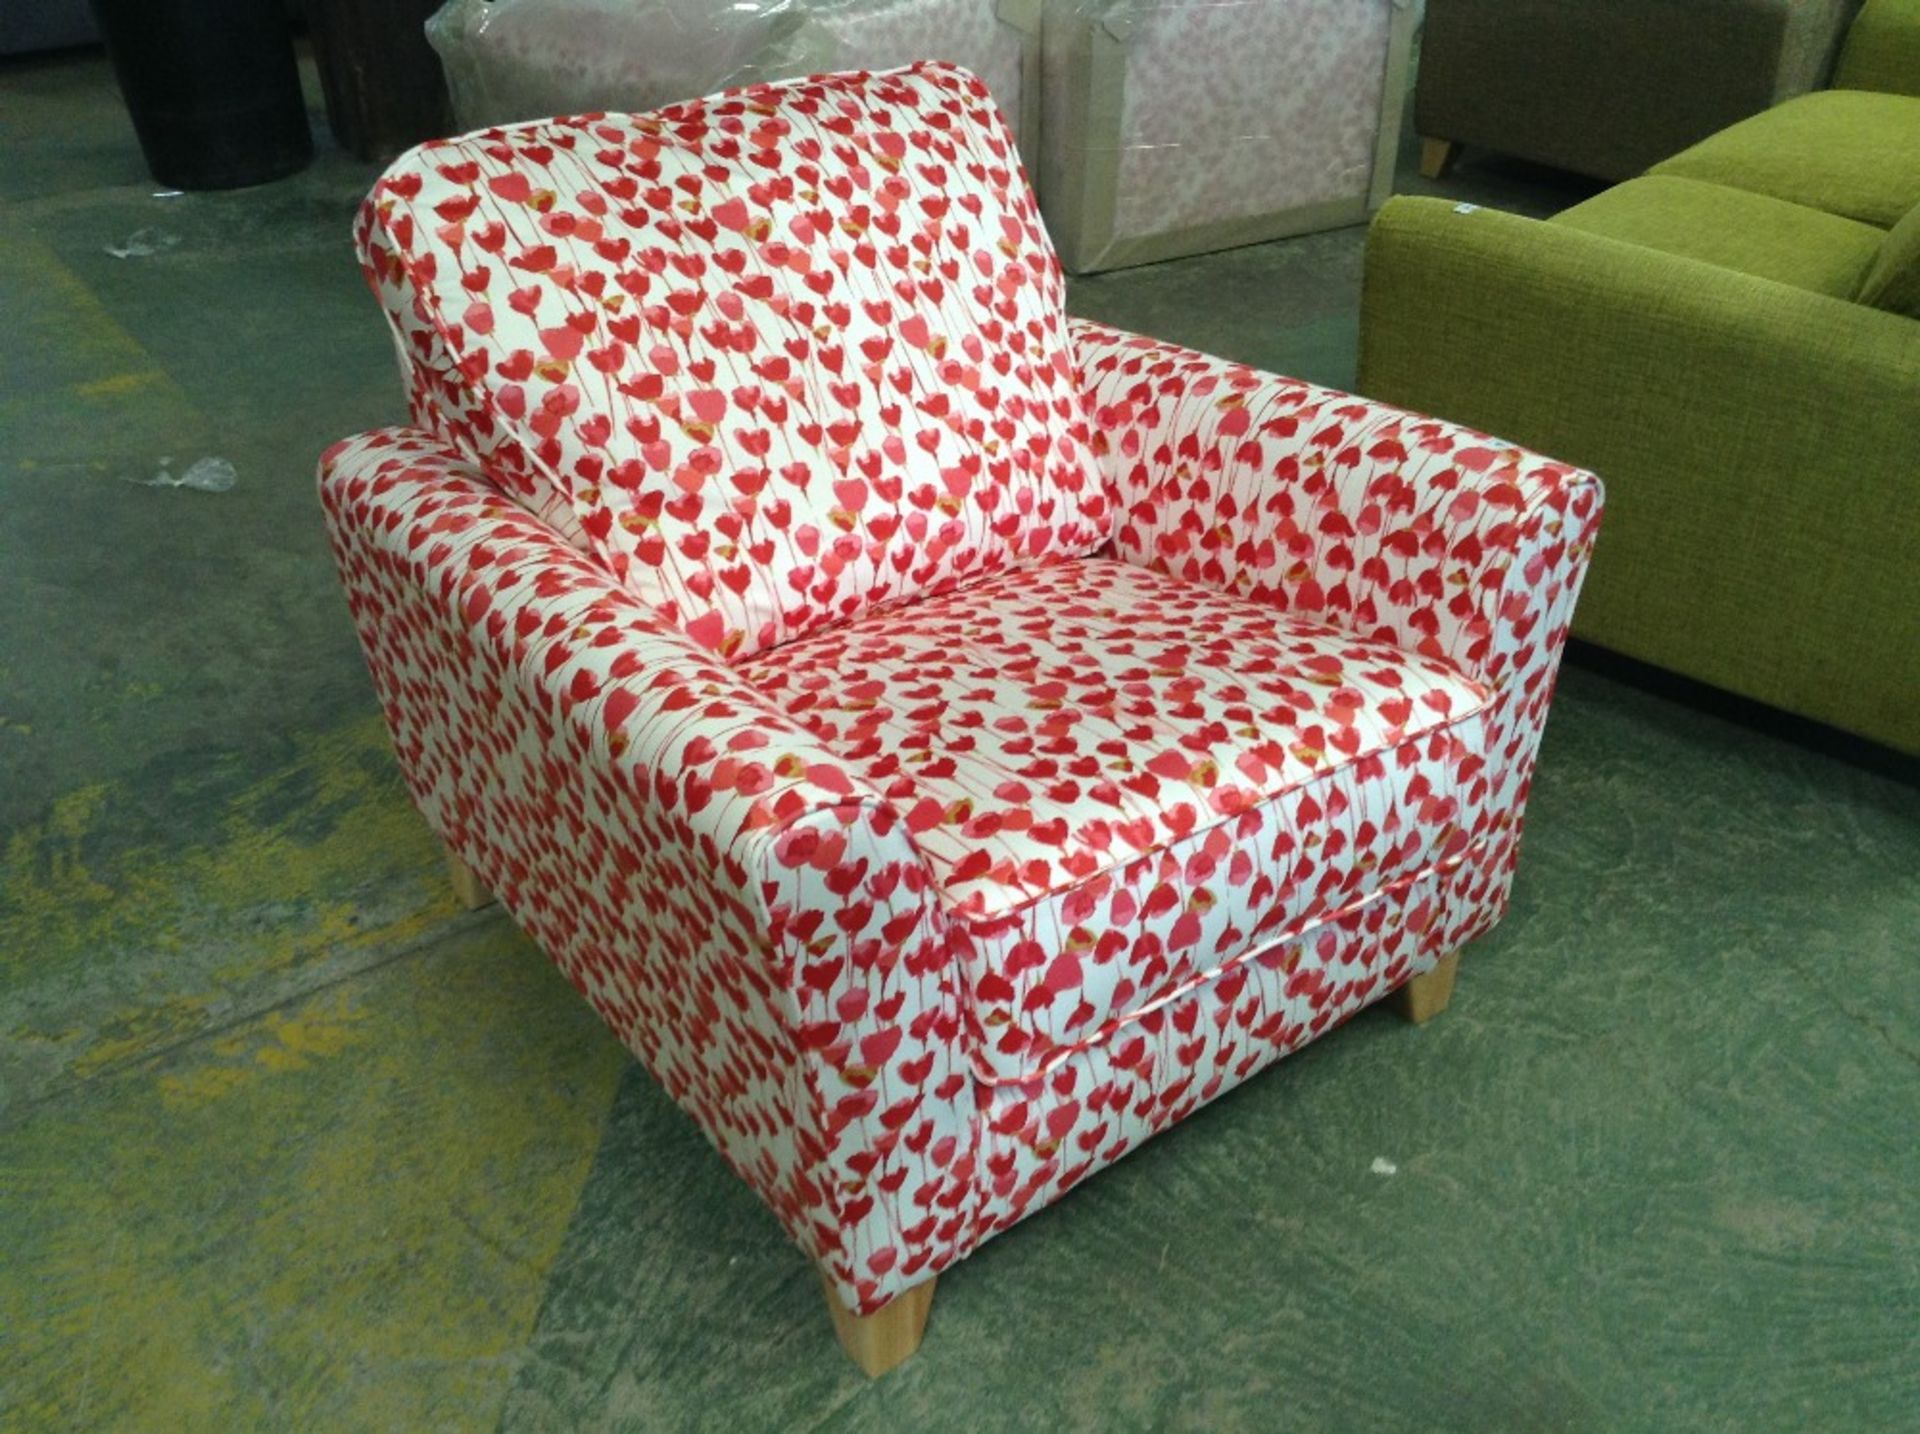 MELBOURNE CHAIRS,TULIPPA RED (SFL114)